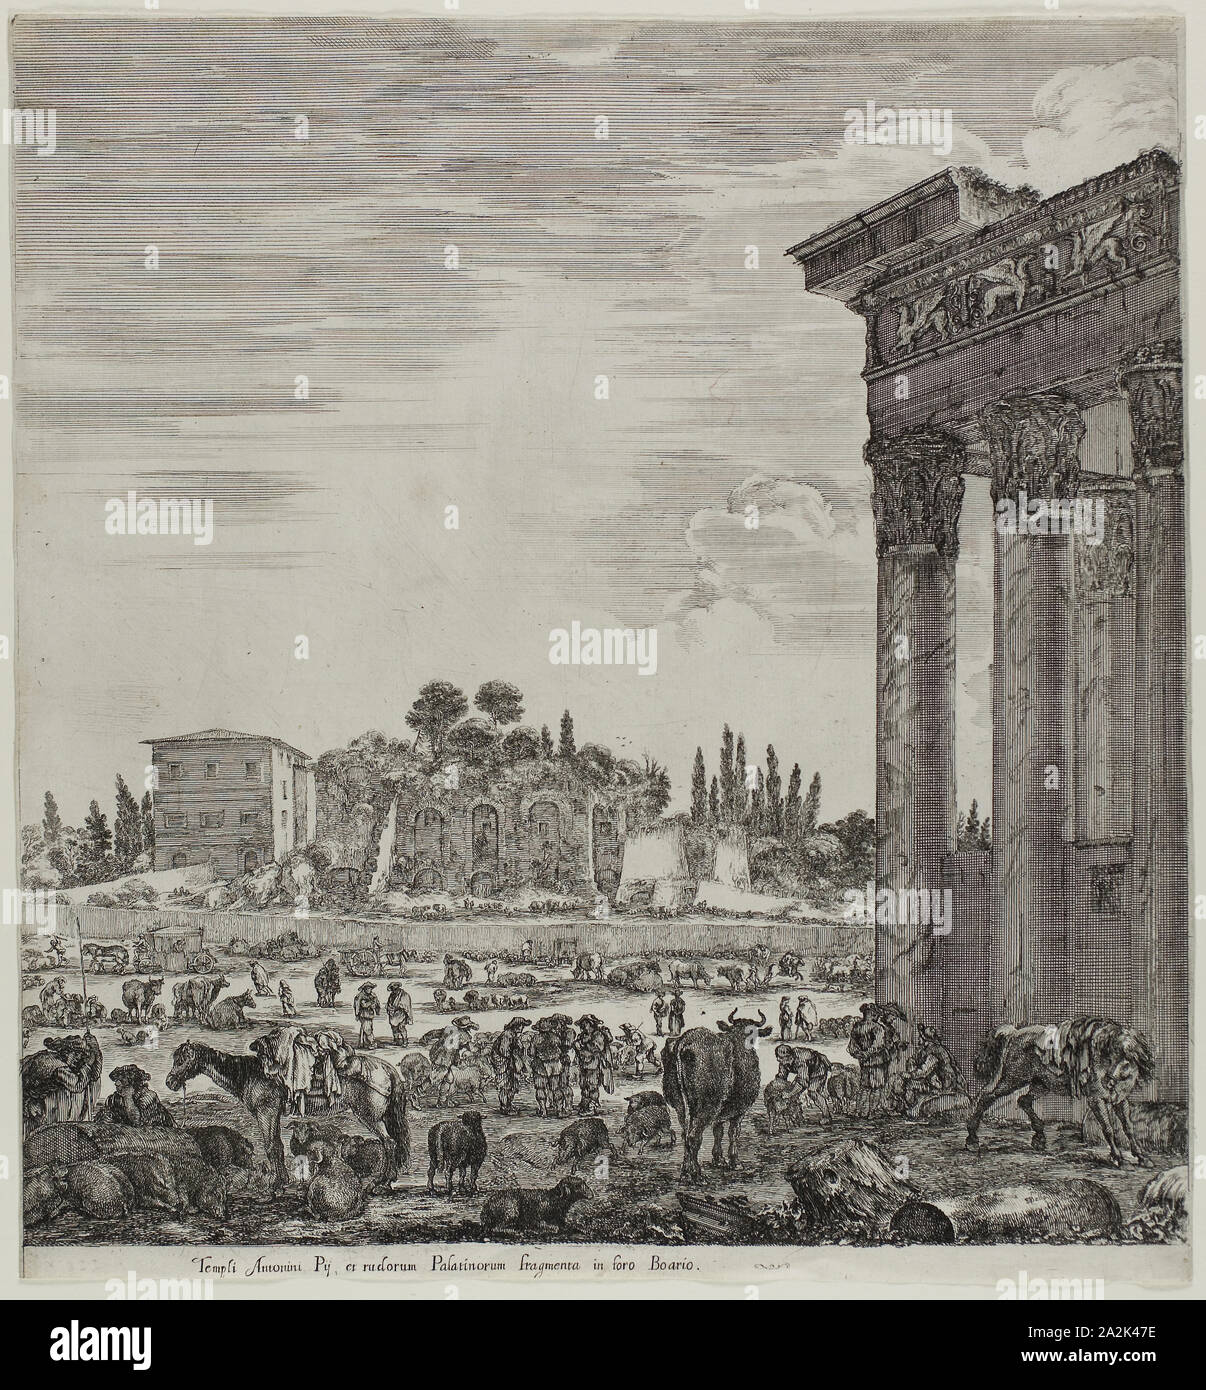 The Temple of Antonin and the Campo Vaccino, 1654, Stefano della Bella, Italian, 1610-1664, Italy, Etching on ivory laid paper, 298 x 277 mm (image), 298 x 280 mm (sheet Stock Photo